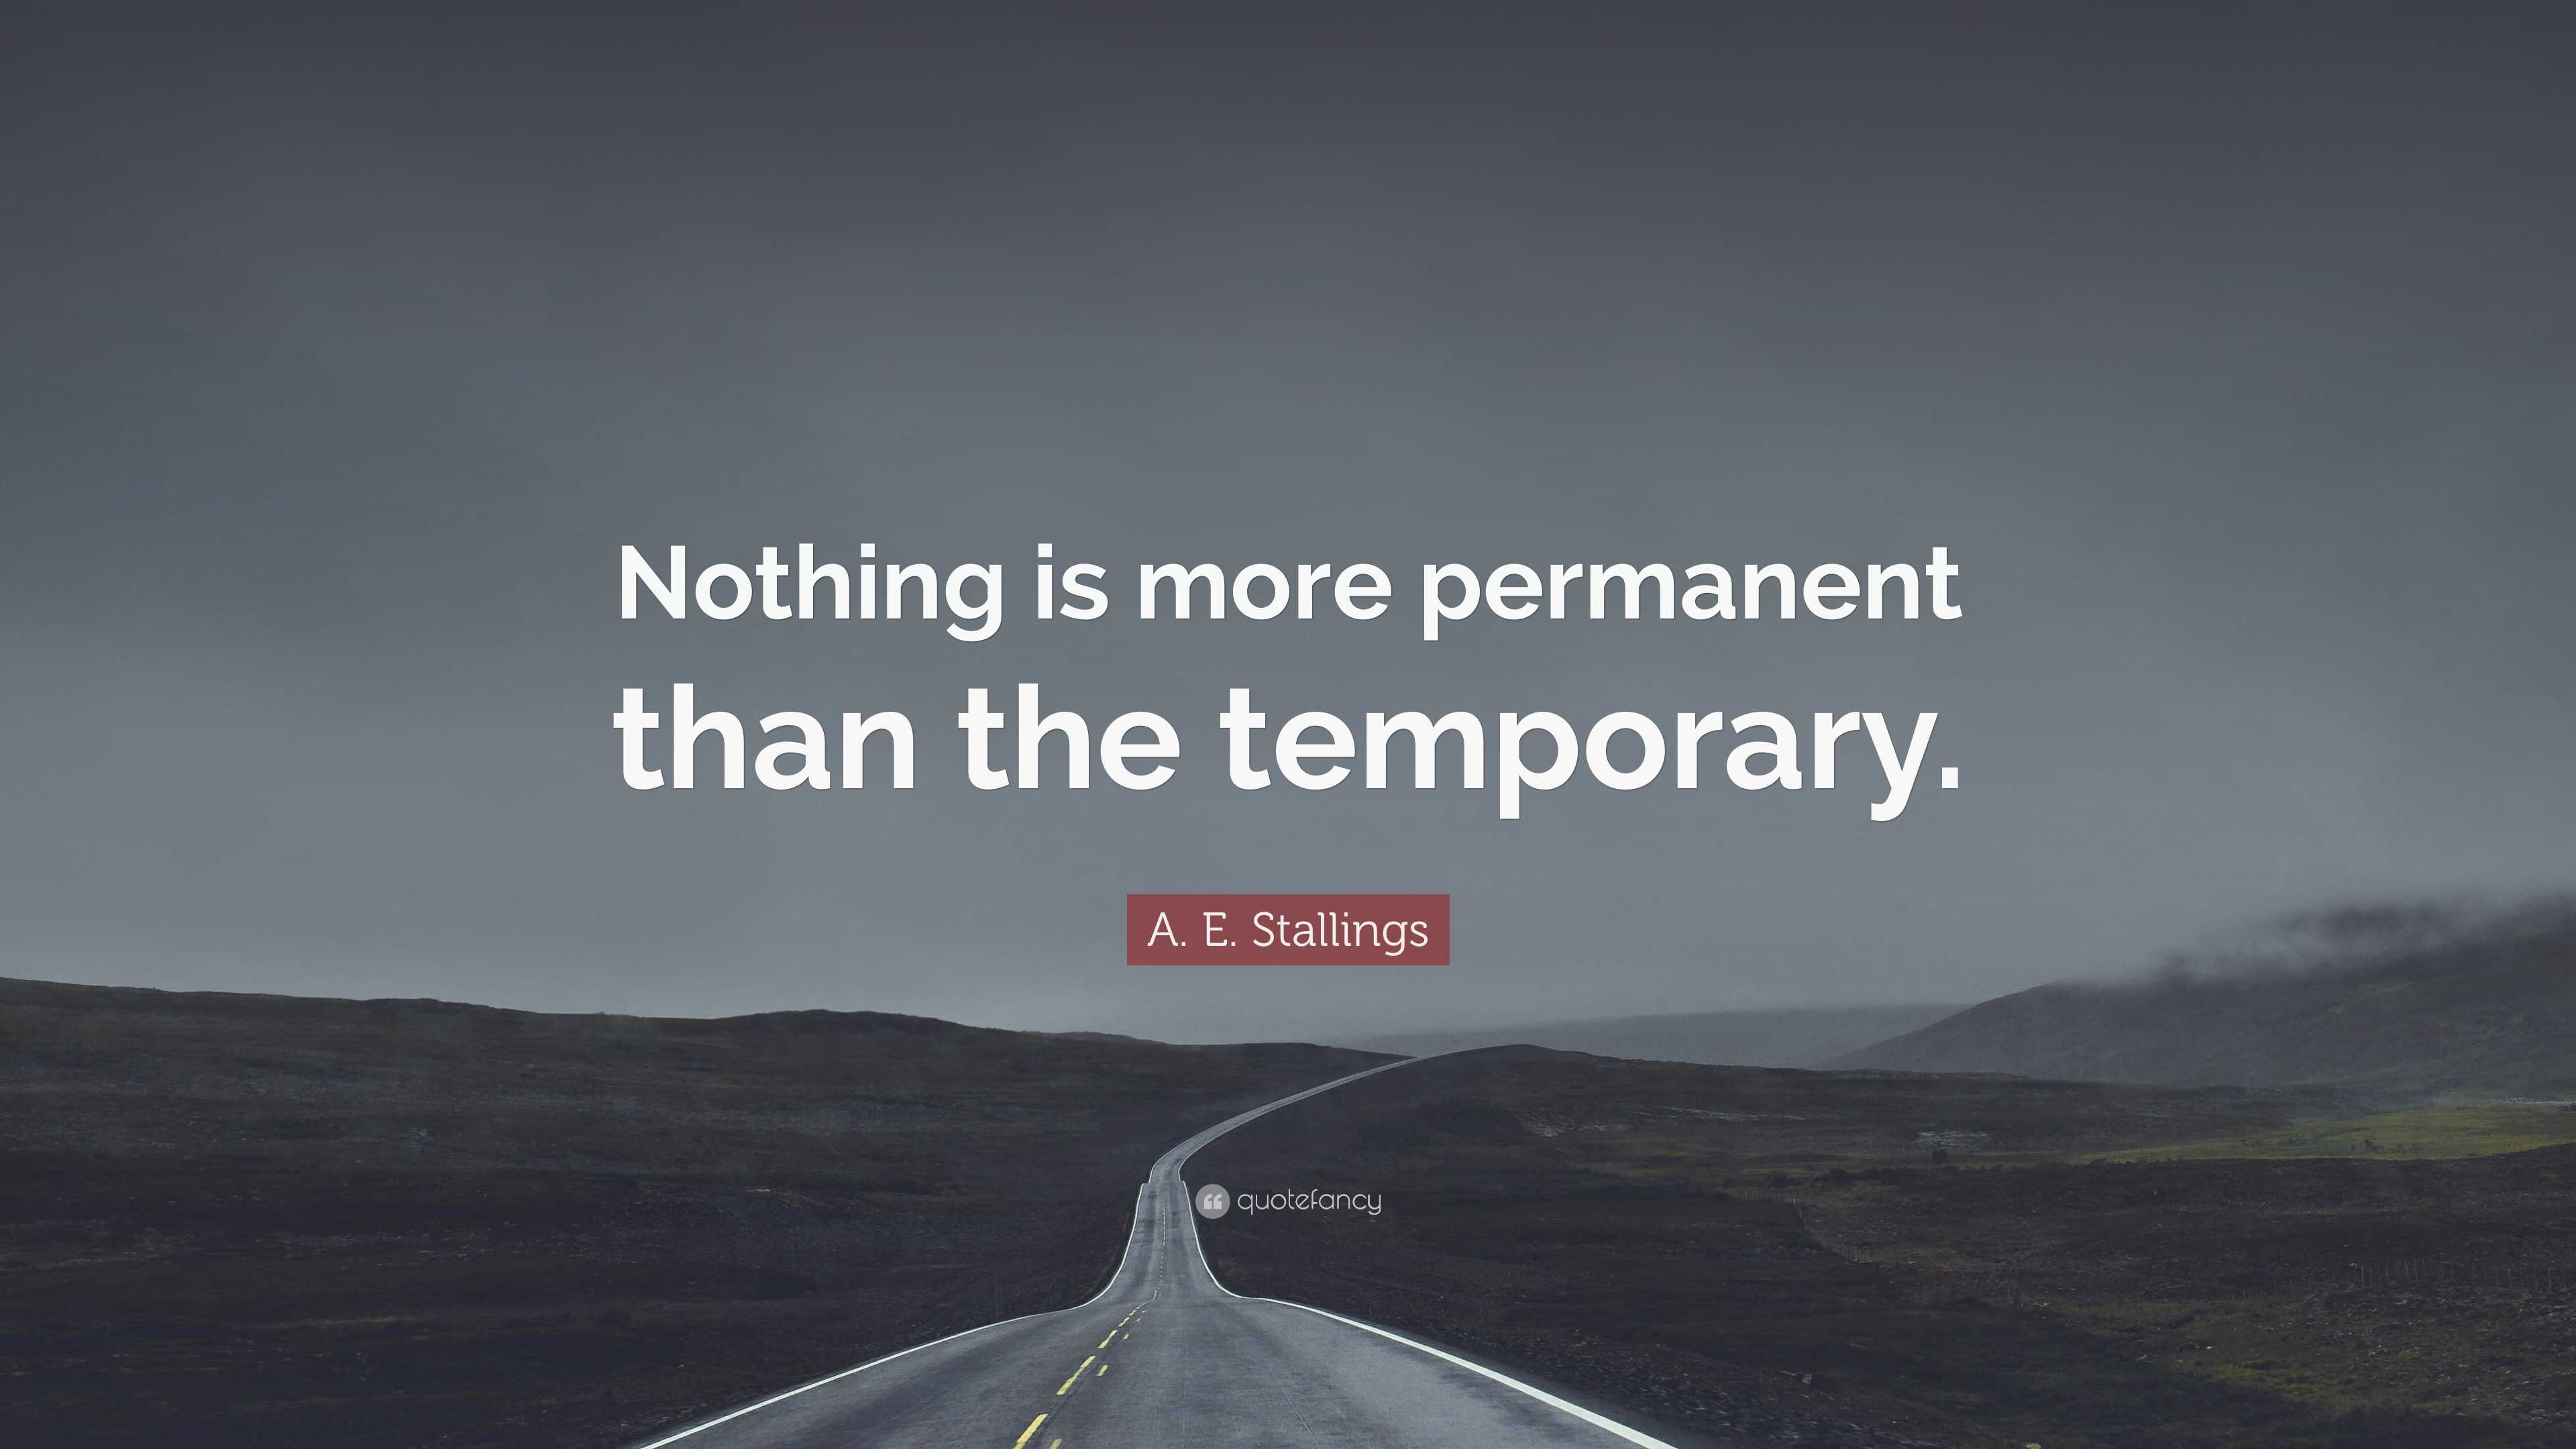 A. E. Stallings Quote: “Nothing is more permanent than the temporary.”